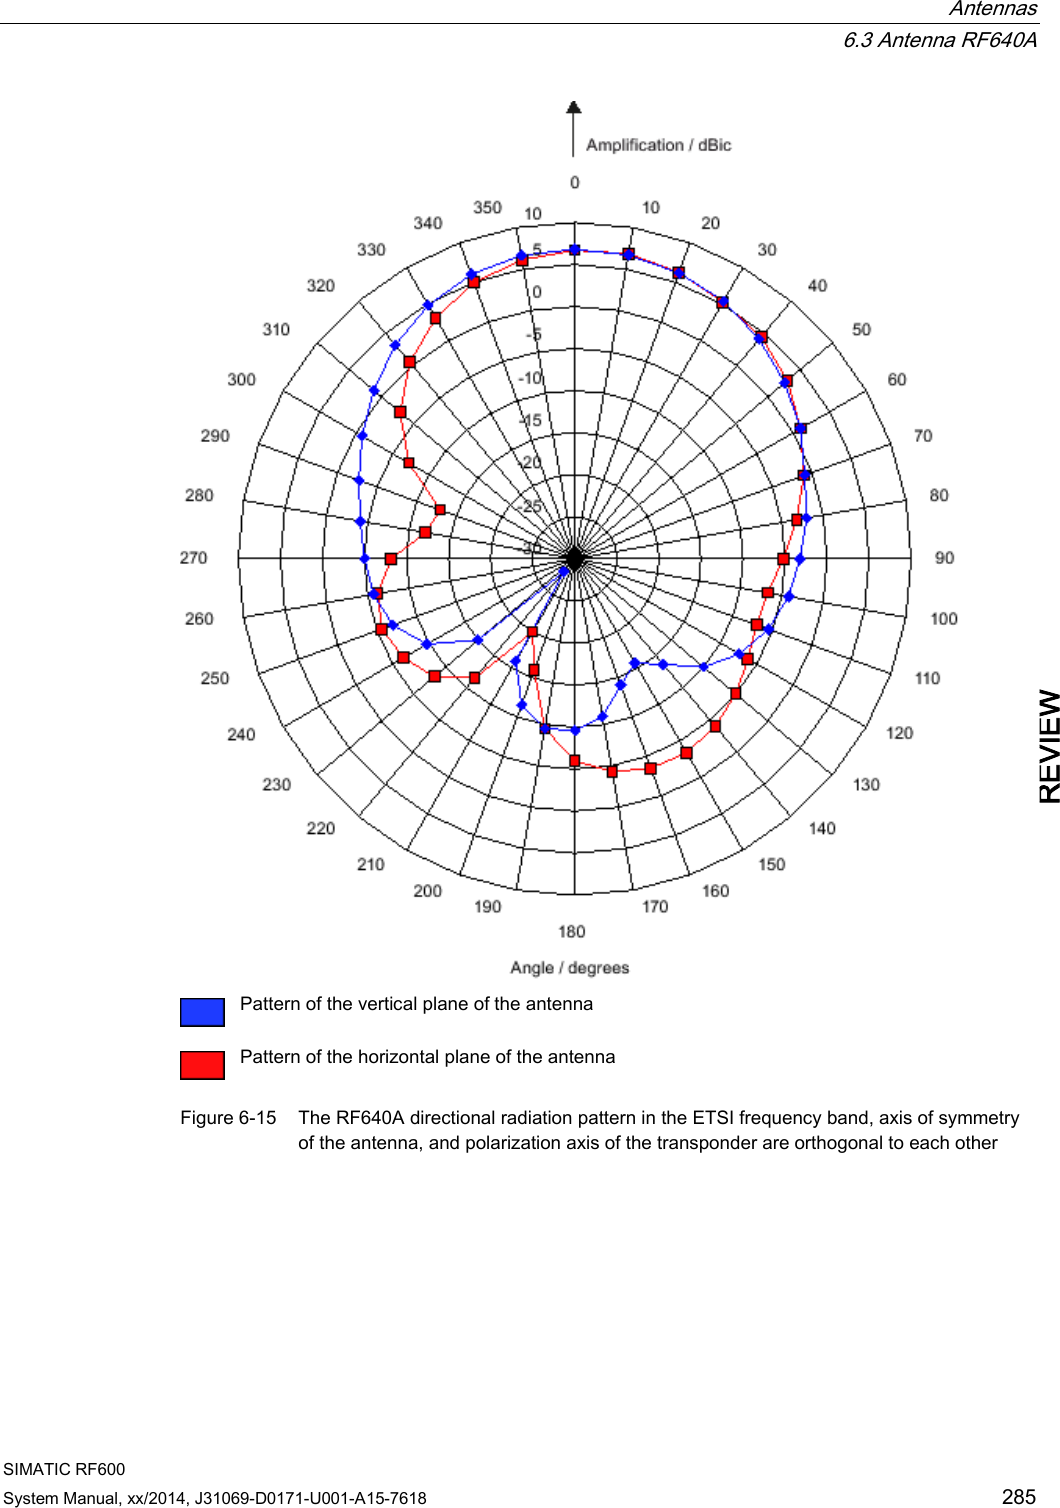  Antennas  6.3 Antenna RF640A SIMATIC RF600 System Manual, xx/2014, J31069-D0171-U001-A15-7618 285 REVIEW   Pattern of the vertical plane of the antenna  Pattern of the horizontal plane of the antenna Figure 6-15 The RF640A directional radiation pattern in the ETSI frequency band, axis of symmetry of the antenna, and polarization axis of the transponder are orthogonal to each other 